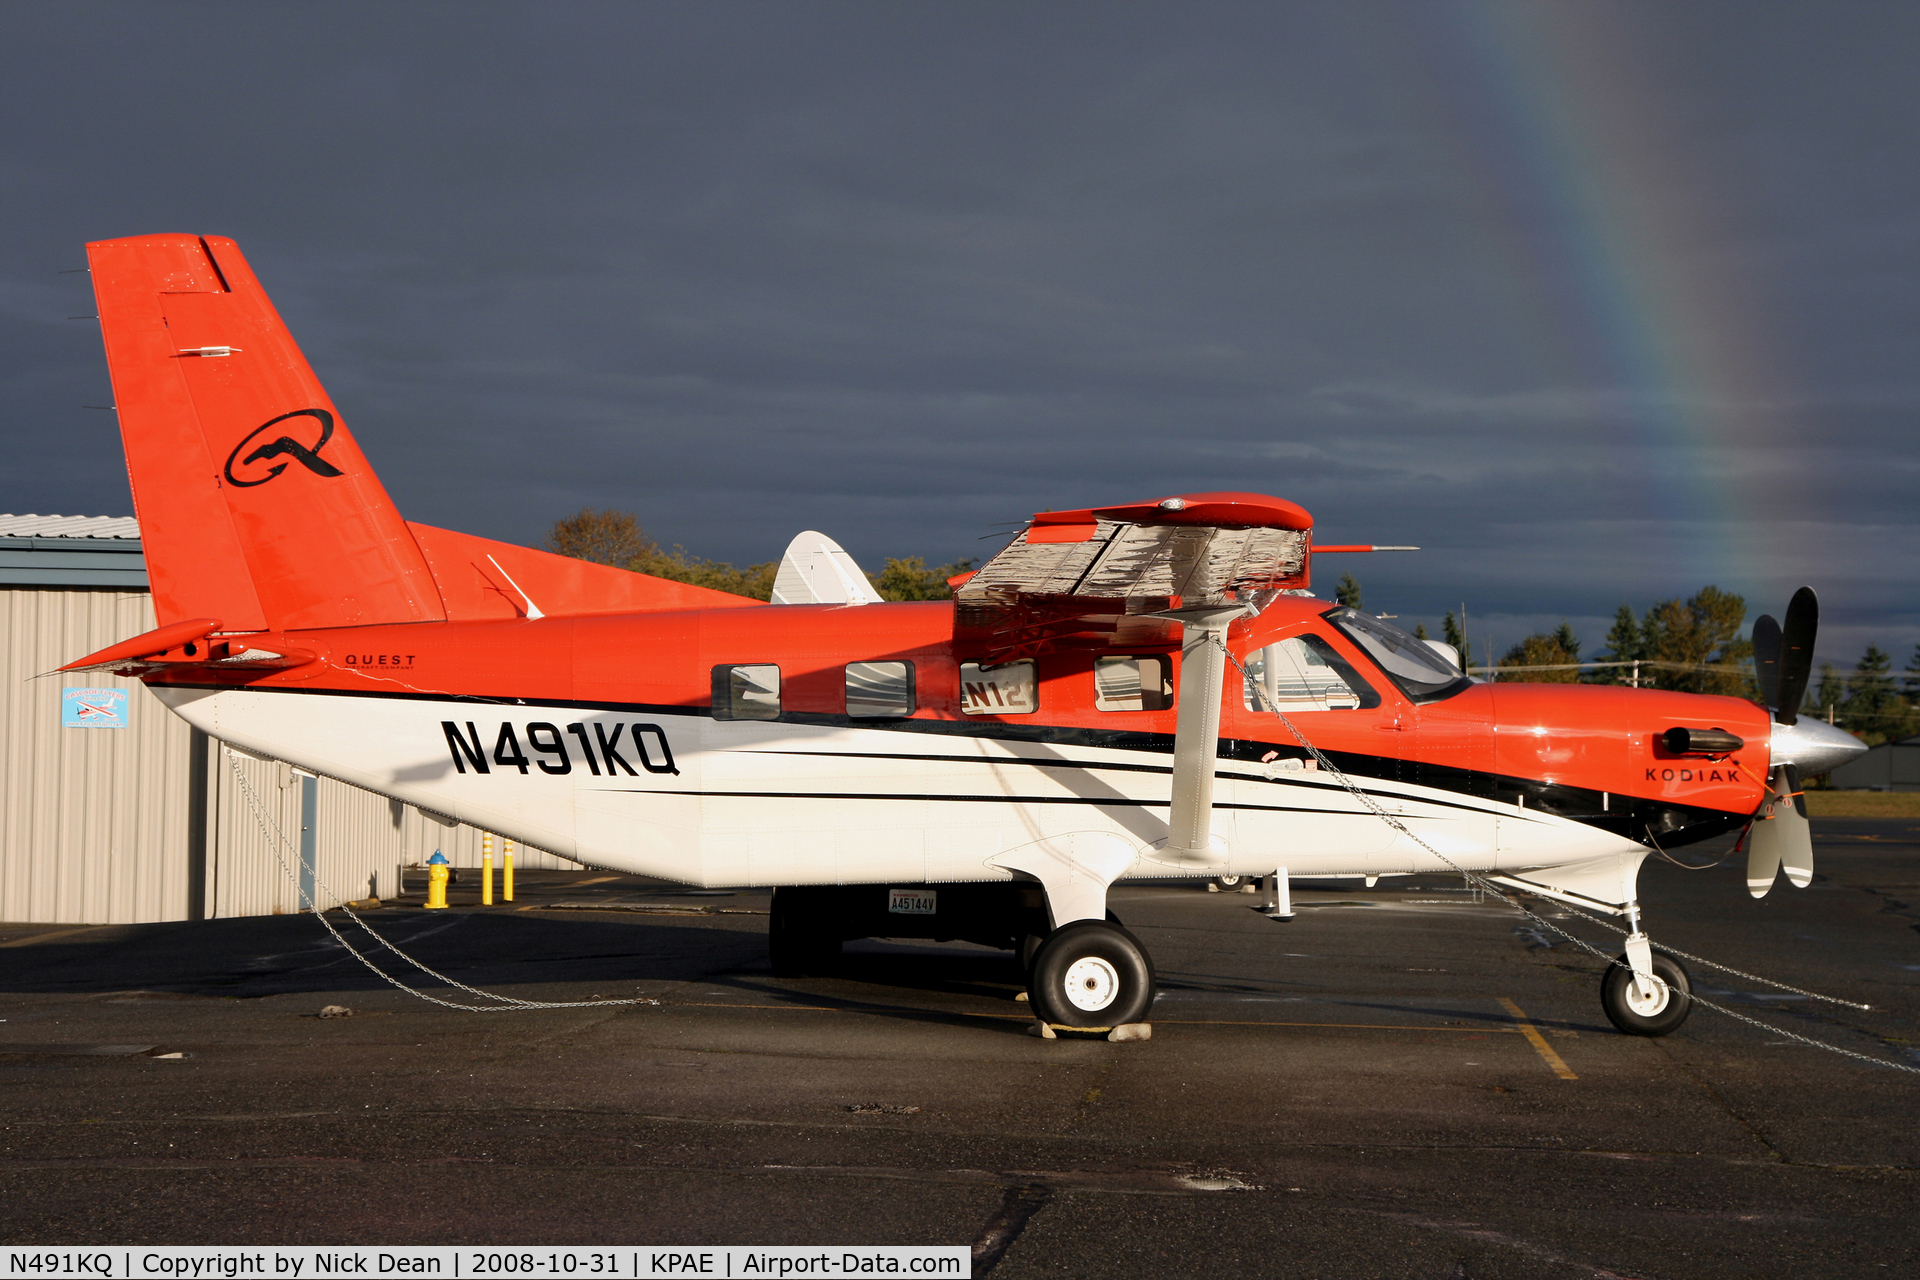 N491KQ, 2007 Quest Kodiak 100 C/N 100-0001, A sun break with a great rainbow at the last minute today